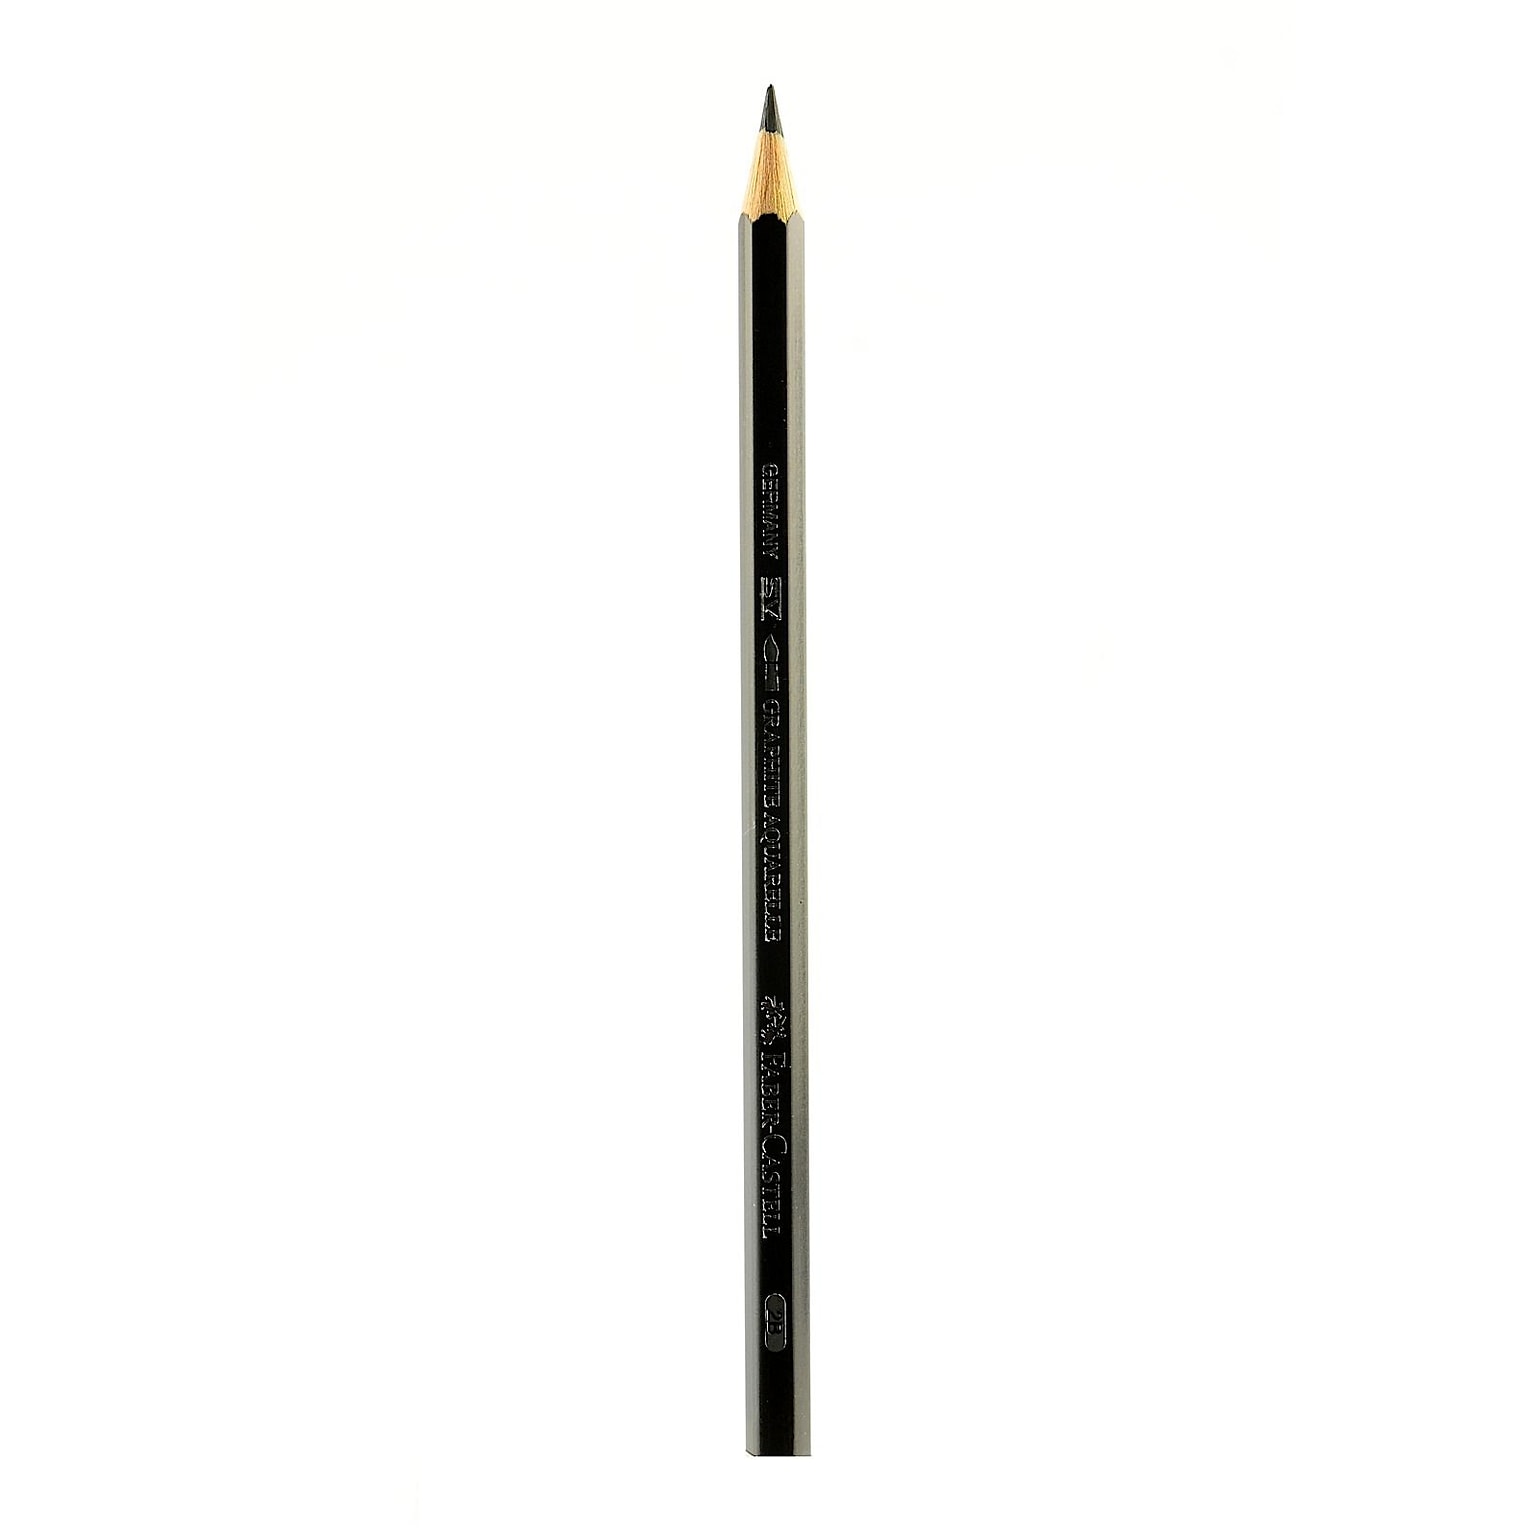 Faber-Castell Graphite Aquarelle Water-Soluble Pencils 2B Each [Pack Of 12] (12PK-117802)